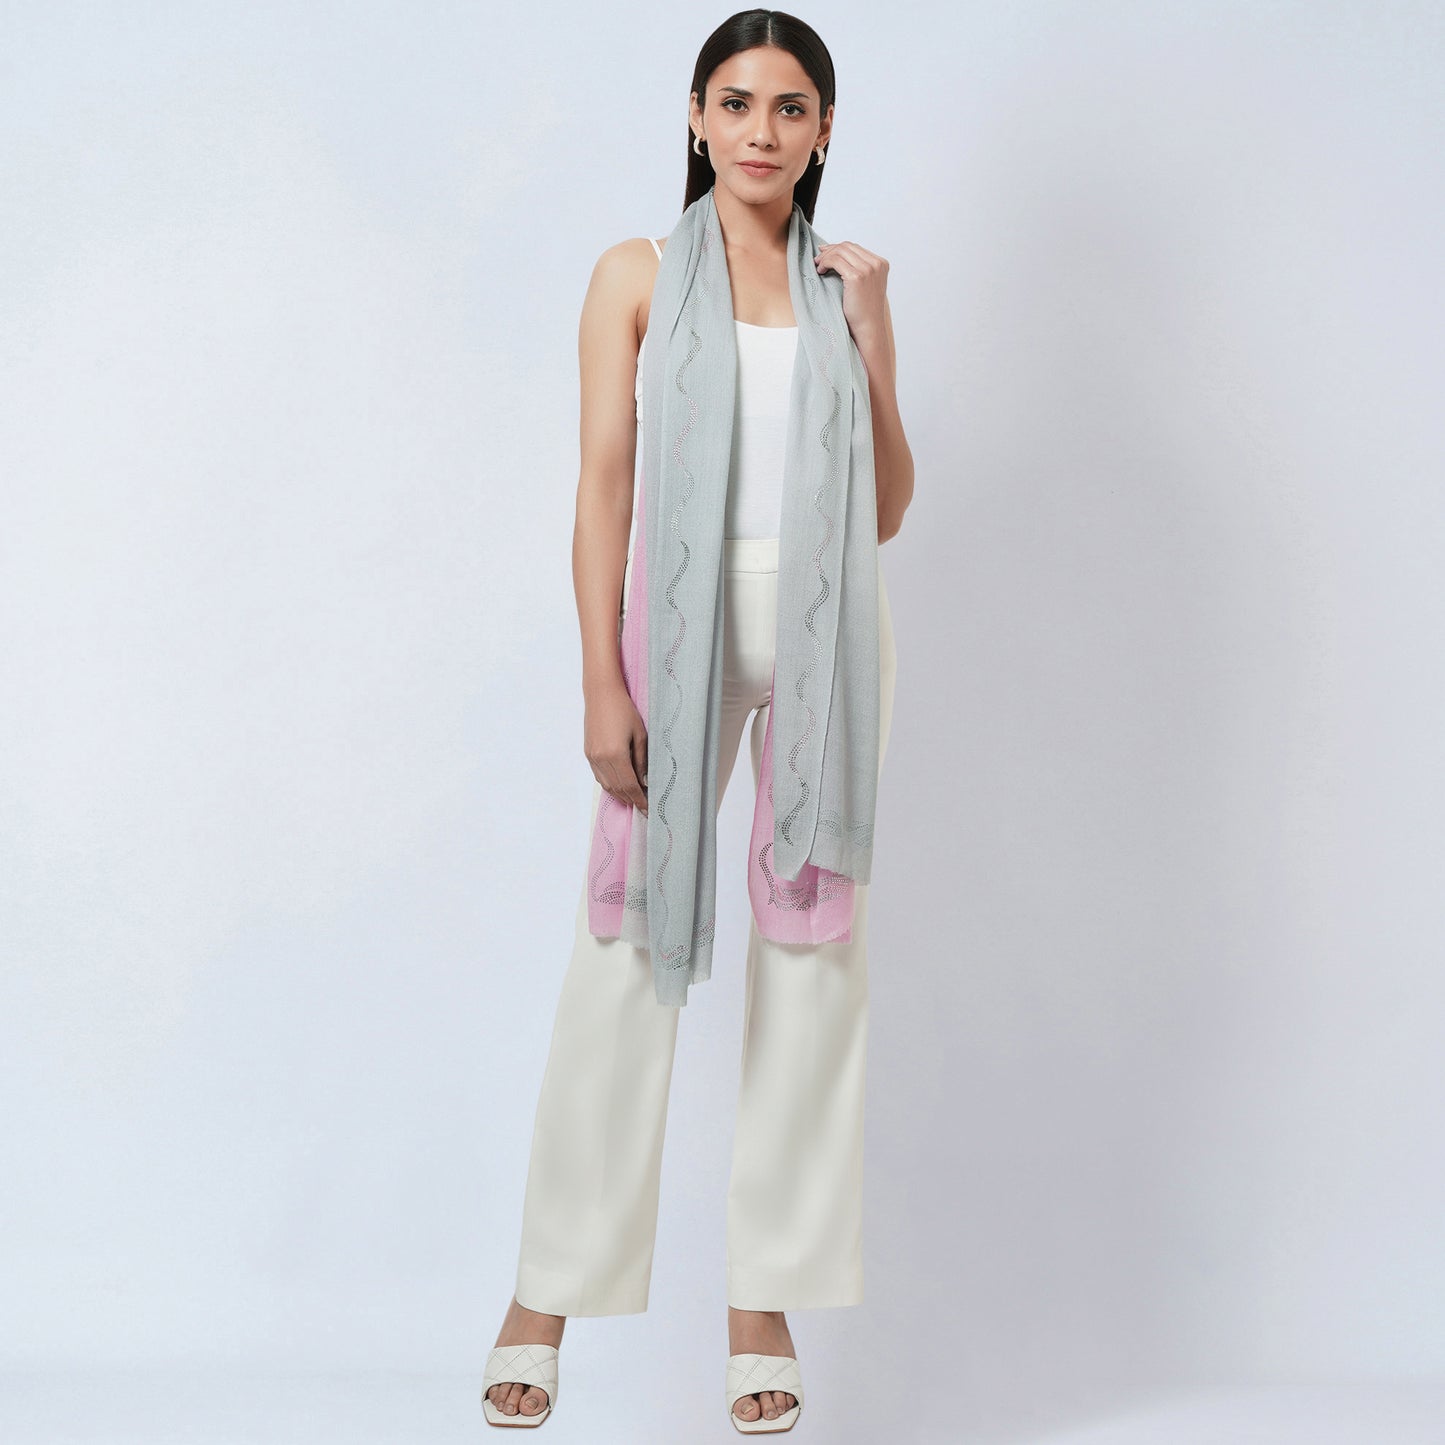 Pink and Grey Ombre Embellished Cashmere Stole